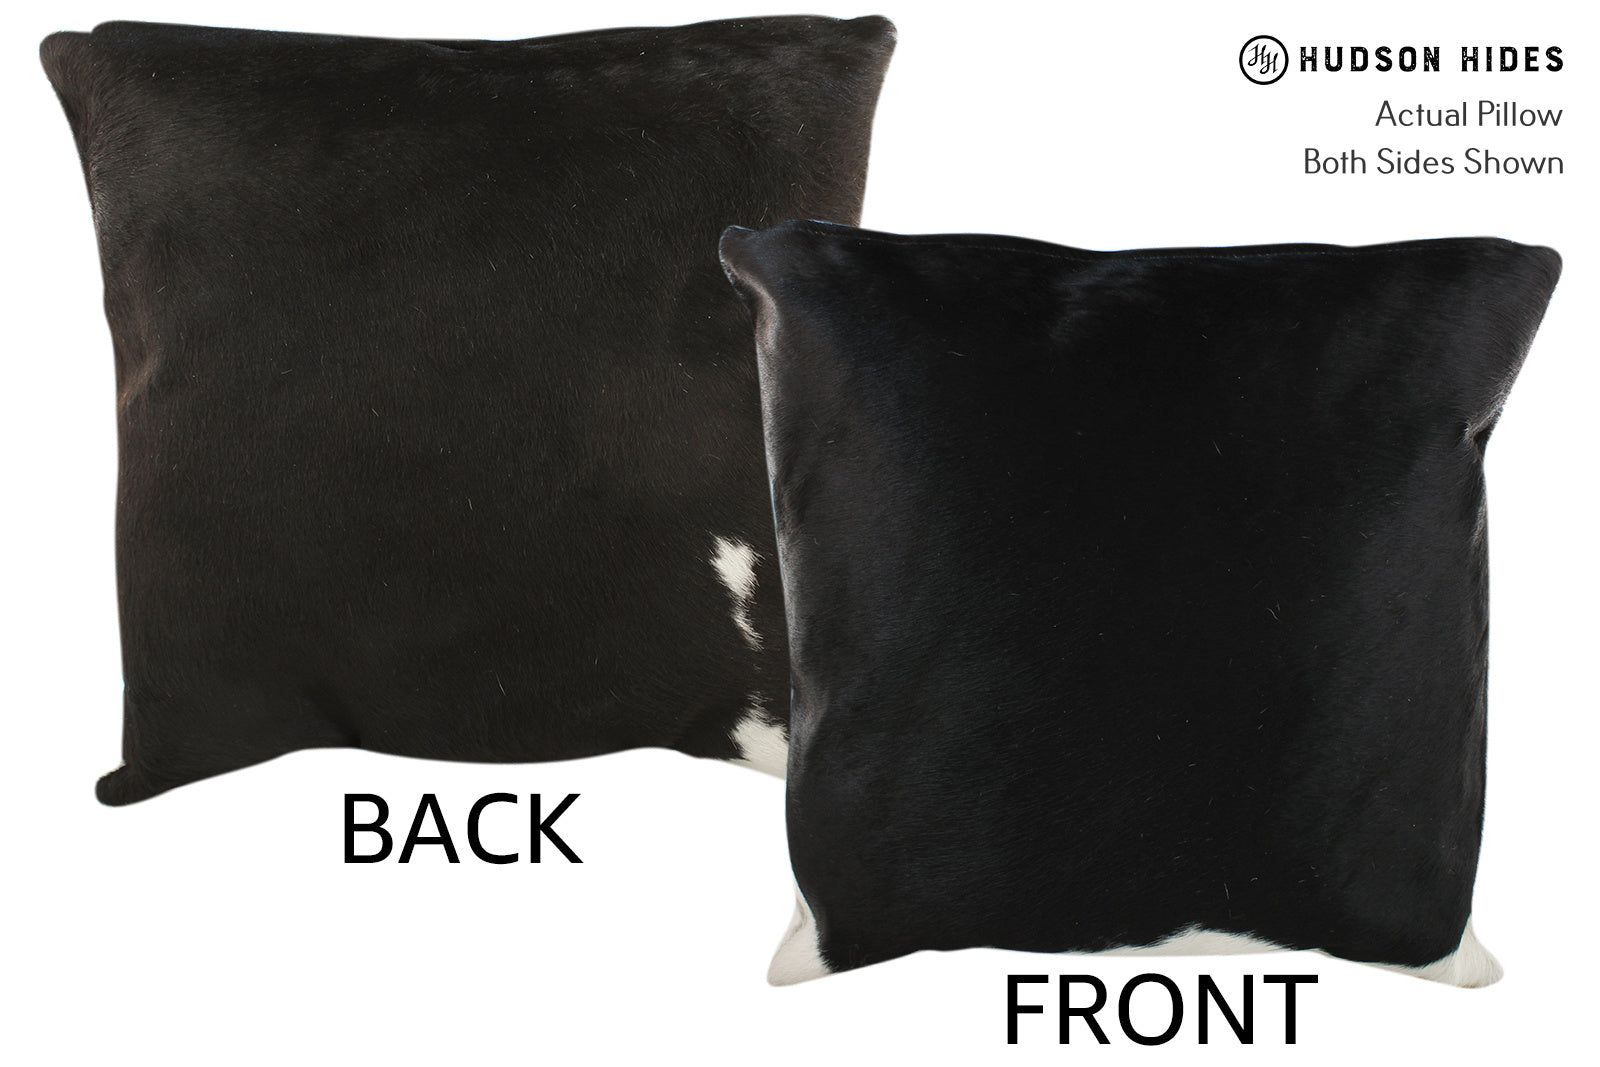 Black and White Cowhide Pillow #19211